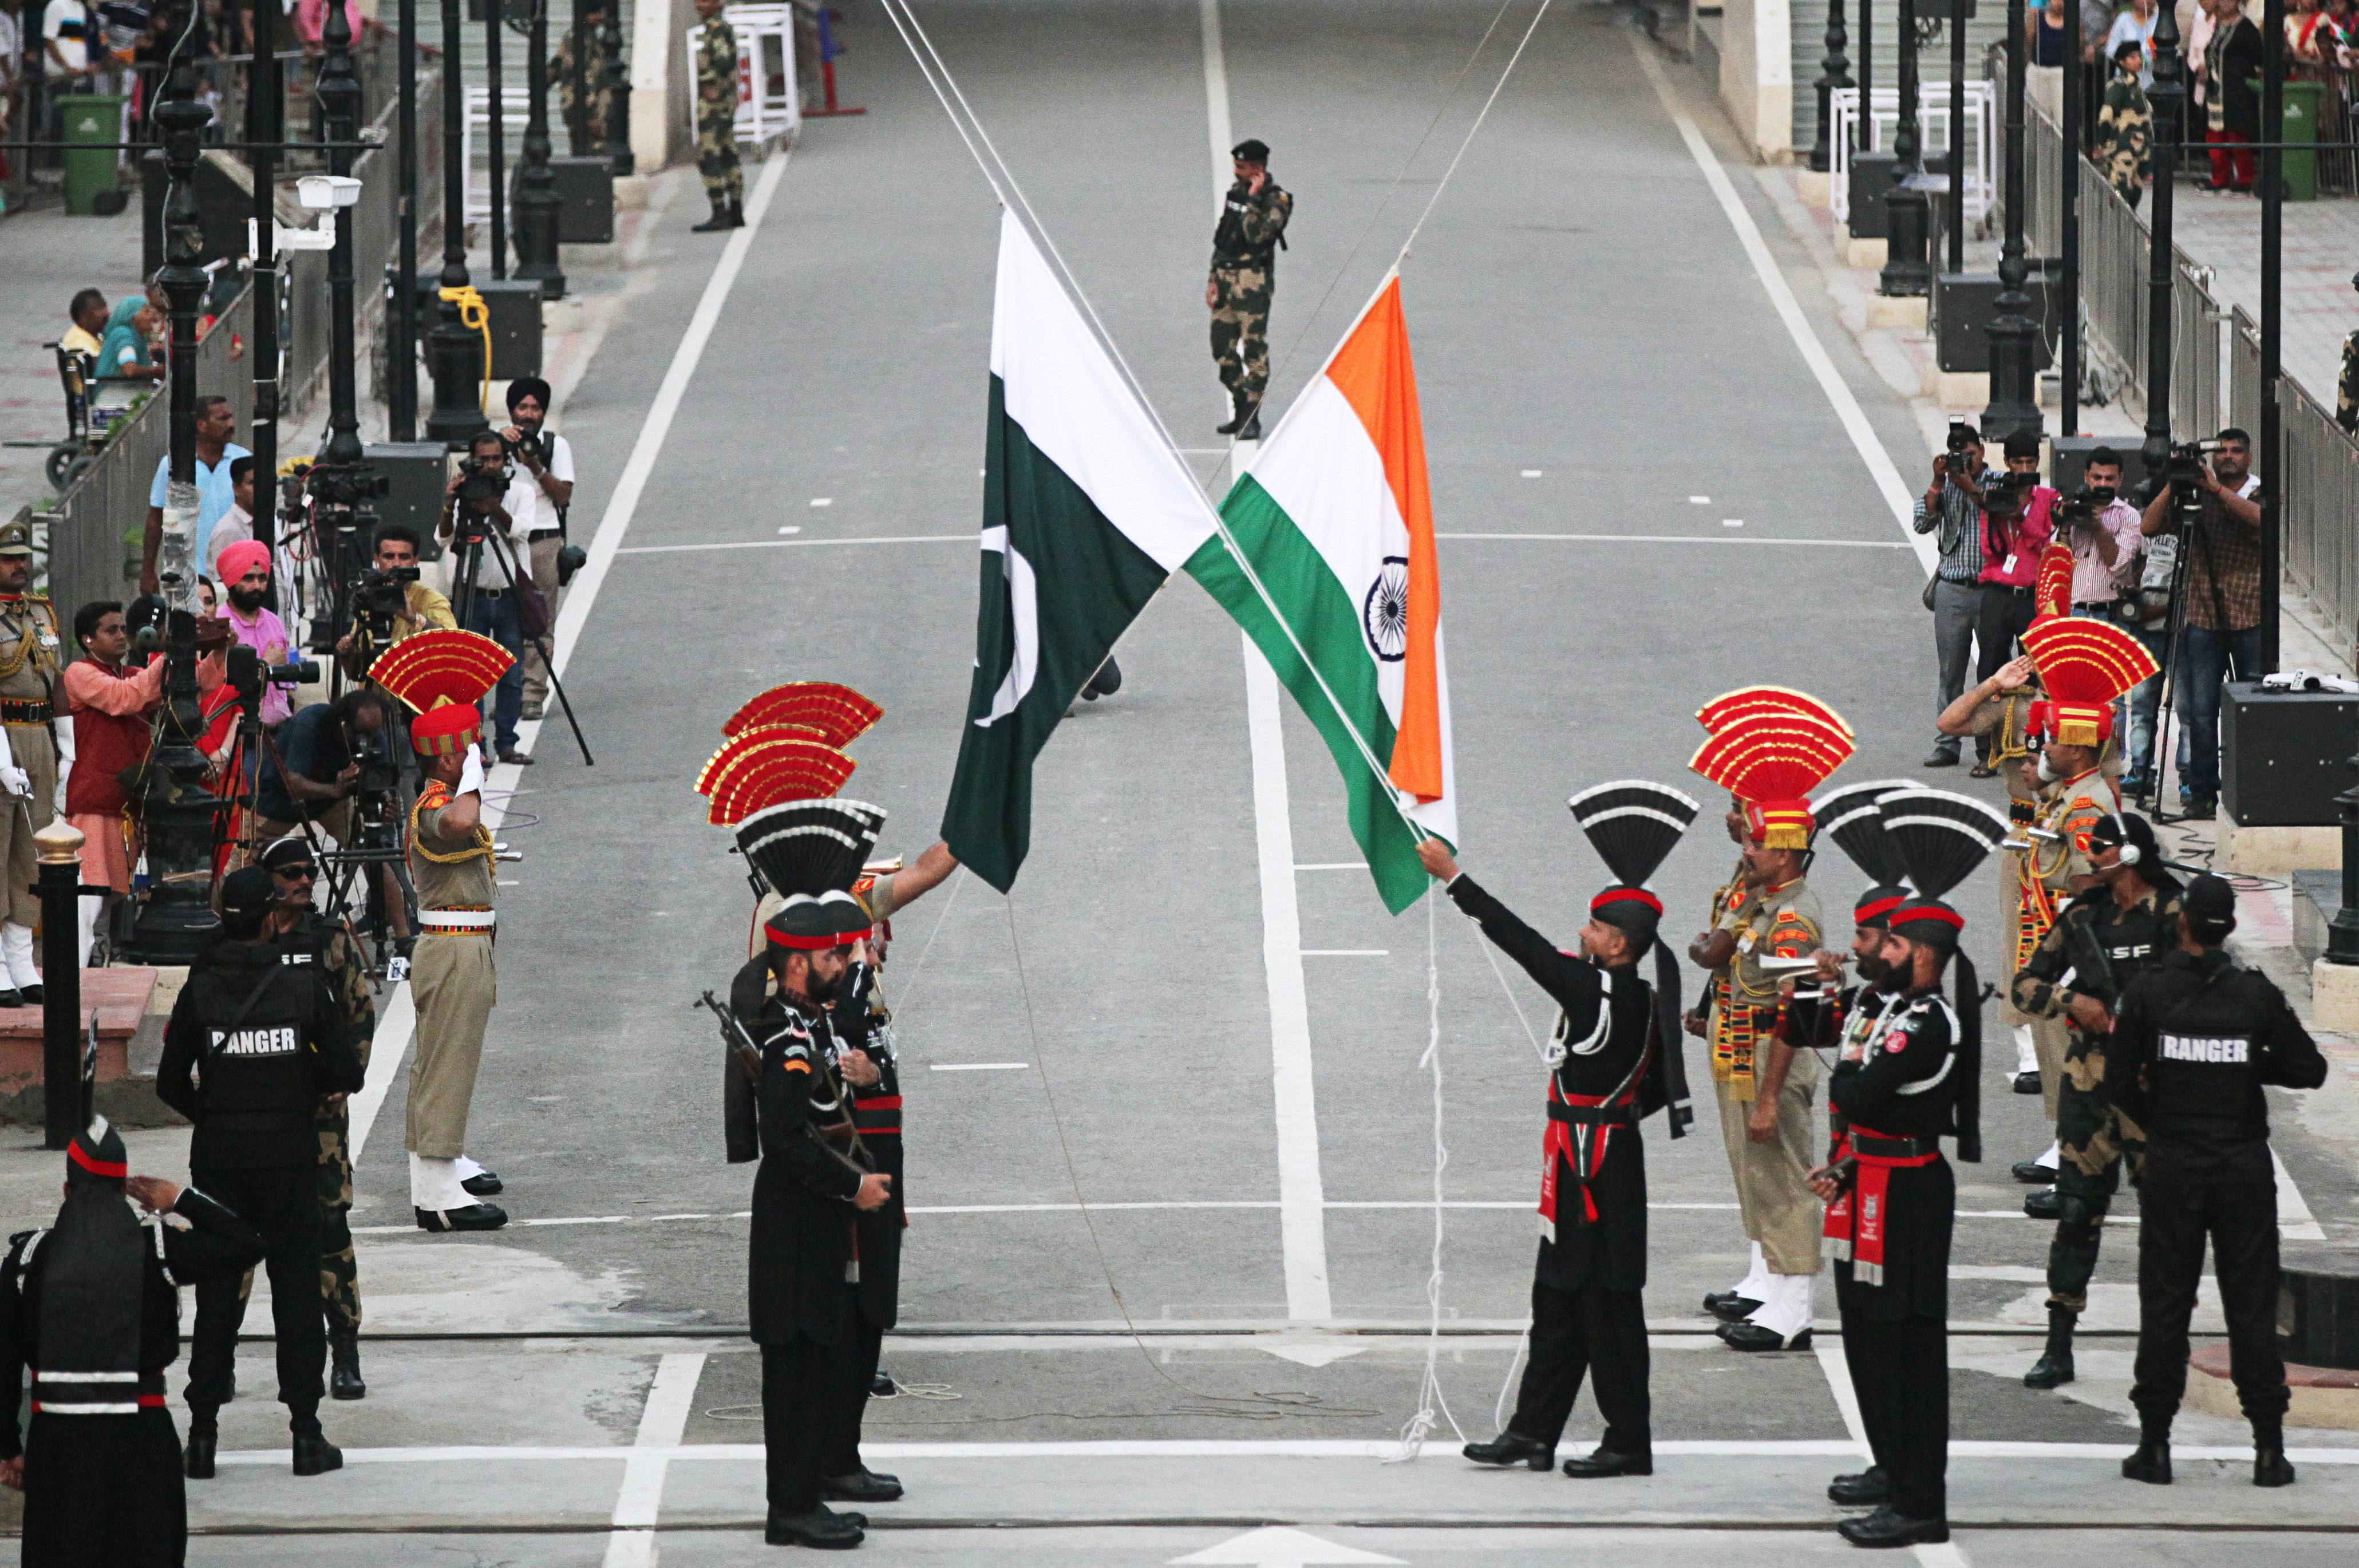 Pakistani Rangers (wearing black uniforms) and Indian Border Security Force (BSF) officers lower their national flags during parade on the Pakistan's 72nd Independence Day, at the Pakistan-India joint check-post at Wagah border, near Lahore, Pakistan August 14, 2019. REUTERS/Mohsin Raza